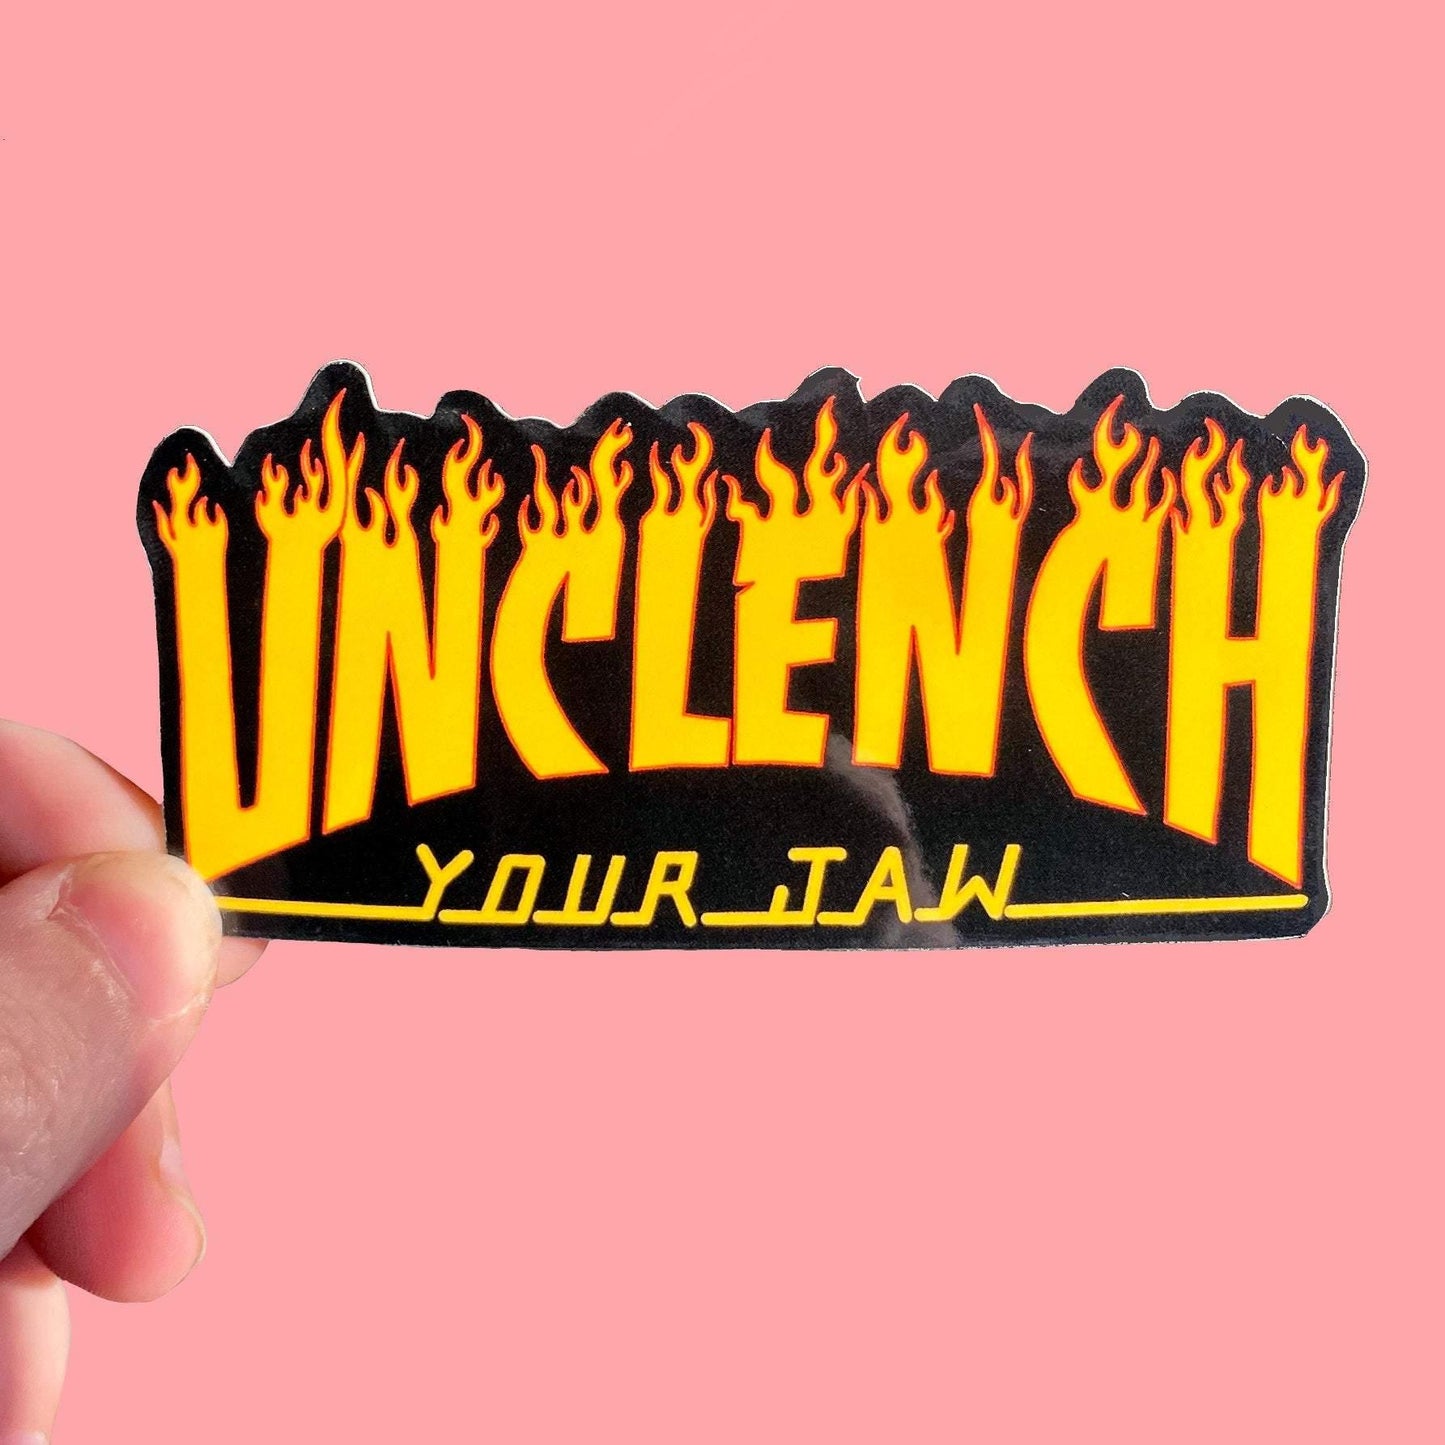 Unclench Your Jaw Sticker - The Peach Fuzz